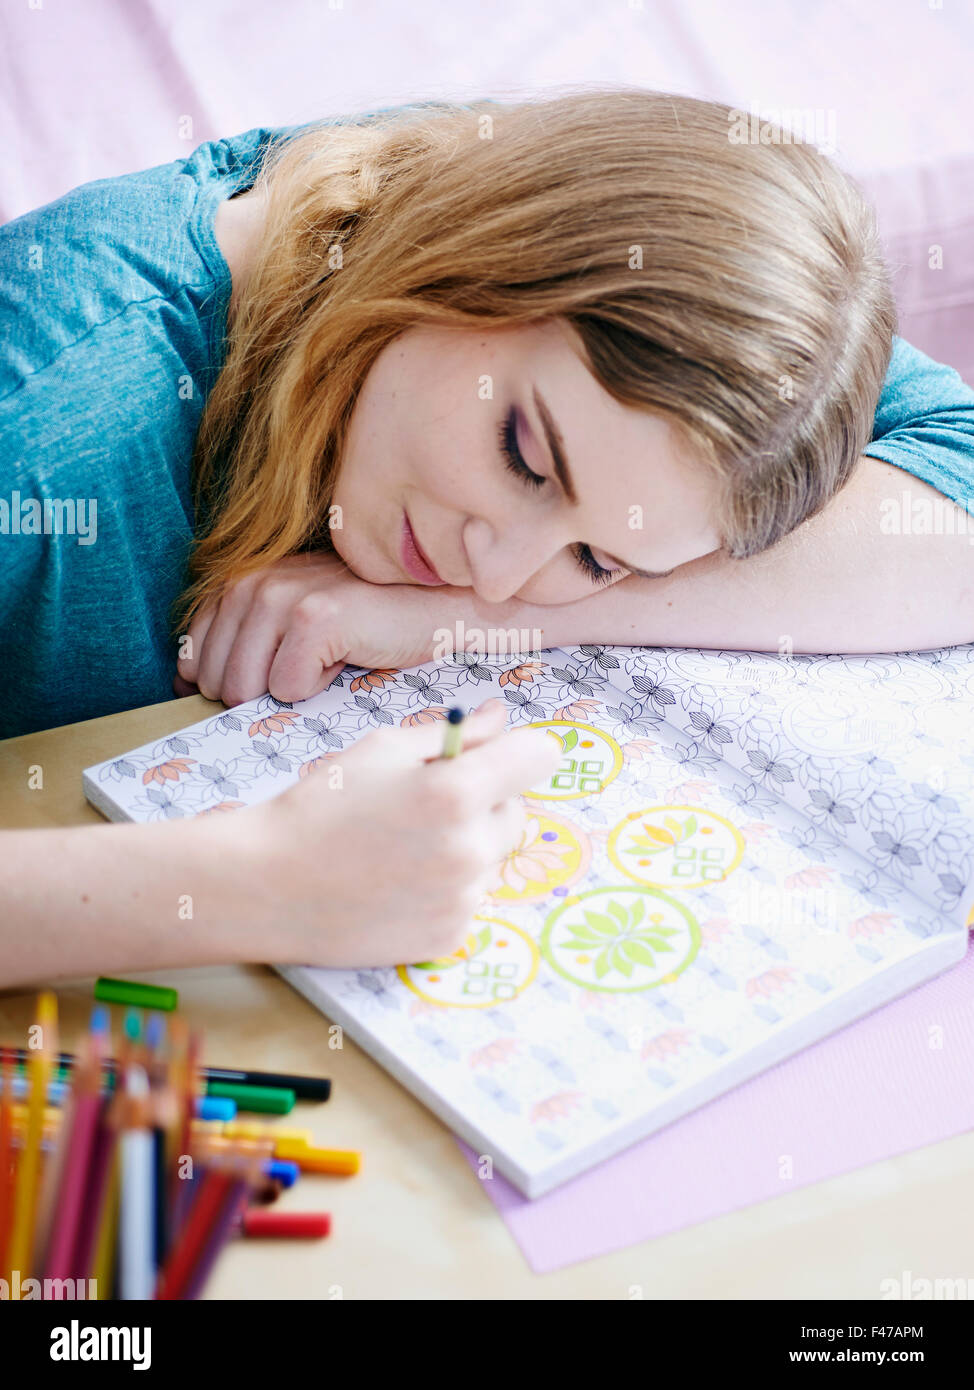 WOMAN COLORING Stock Photo